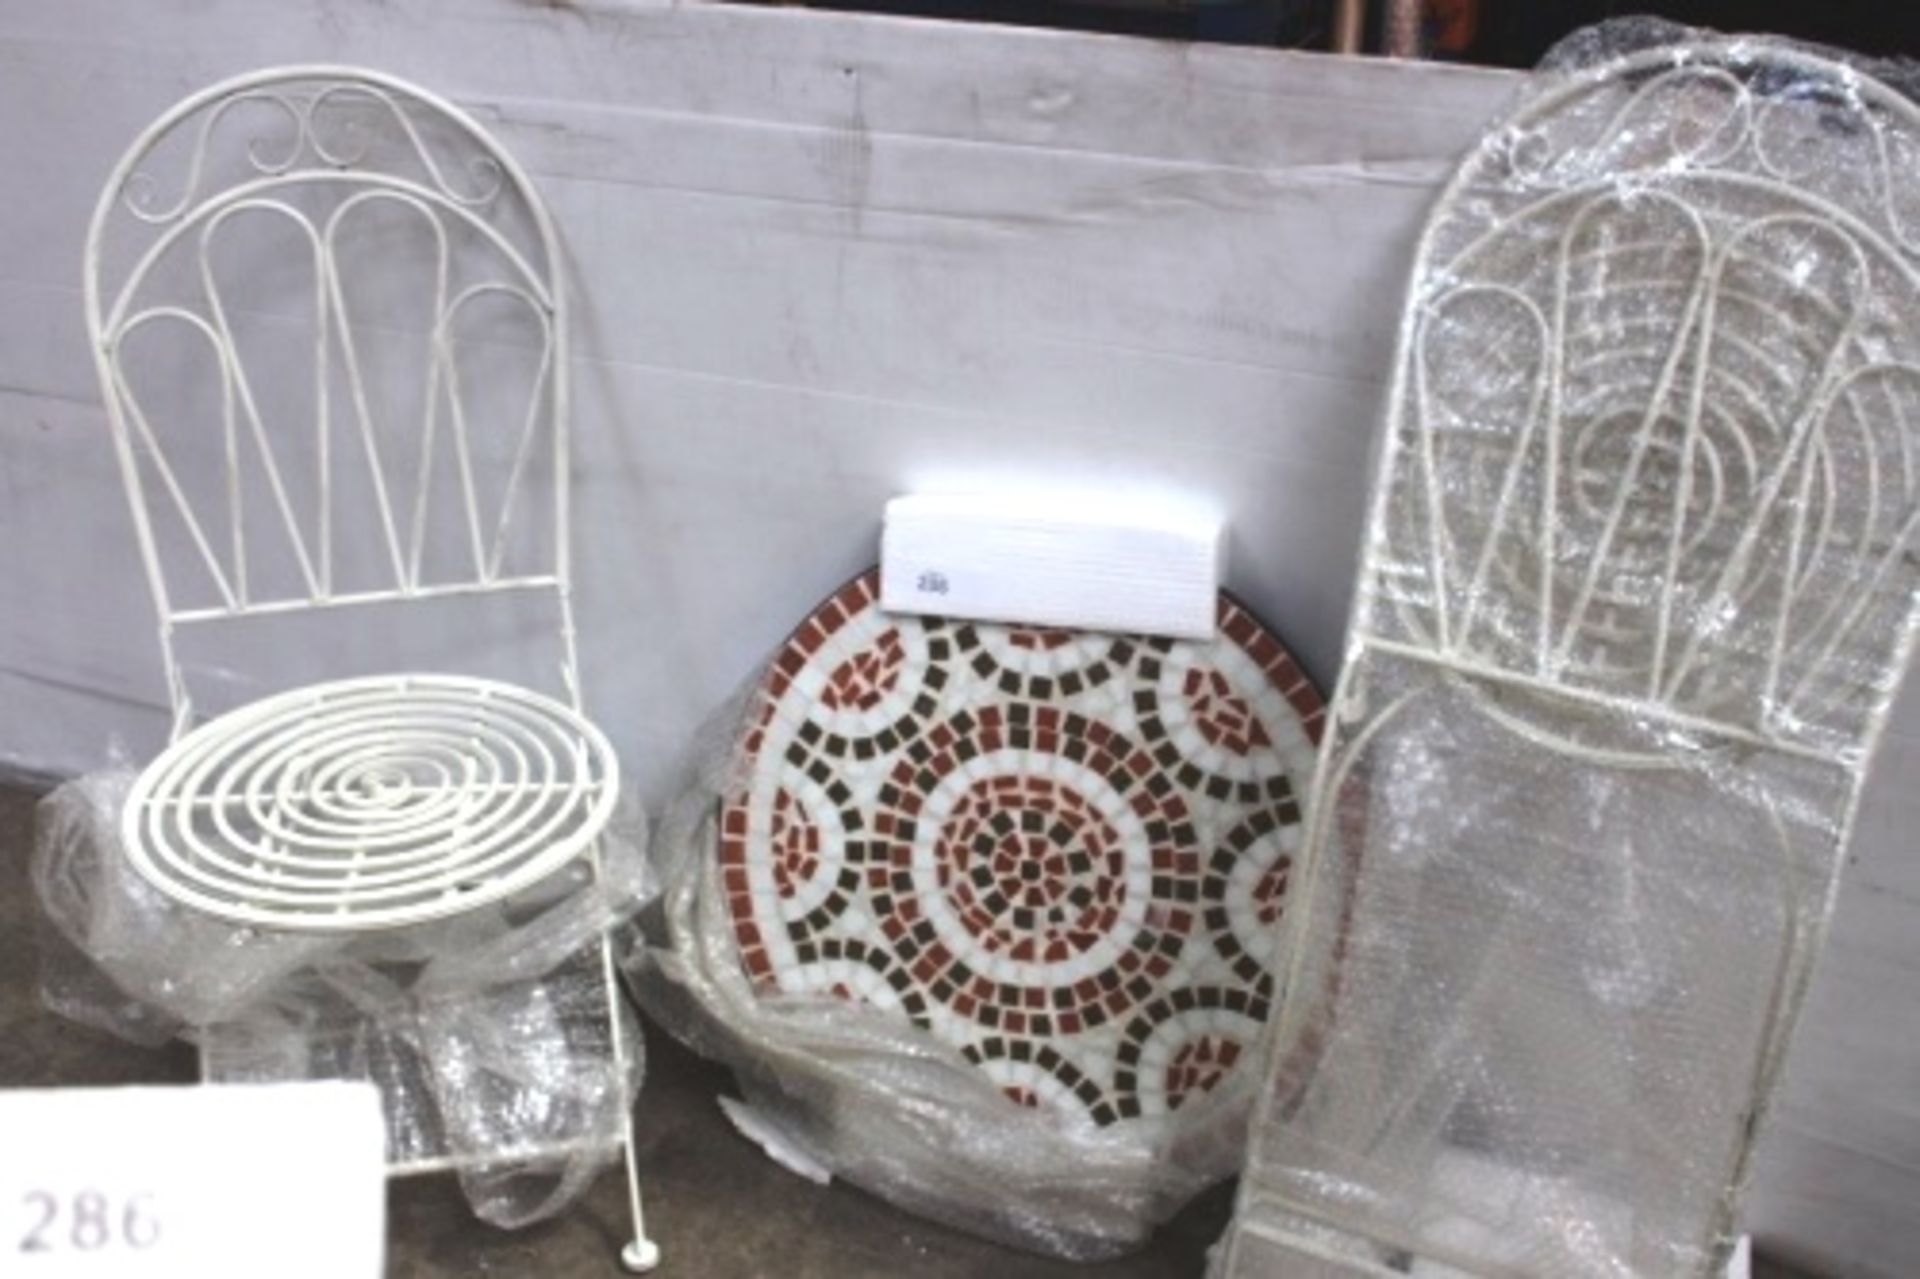 A pair of Royalcraft Romance folding chairs in antique white, Ref: 665001, together with a - Image 2 of 4